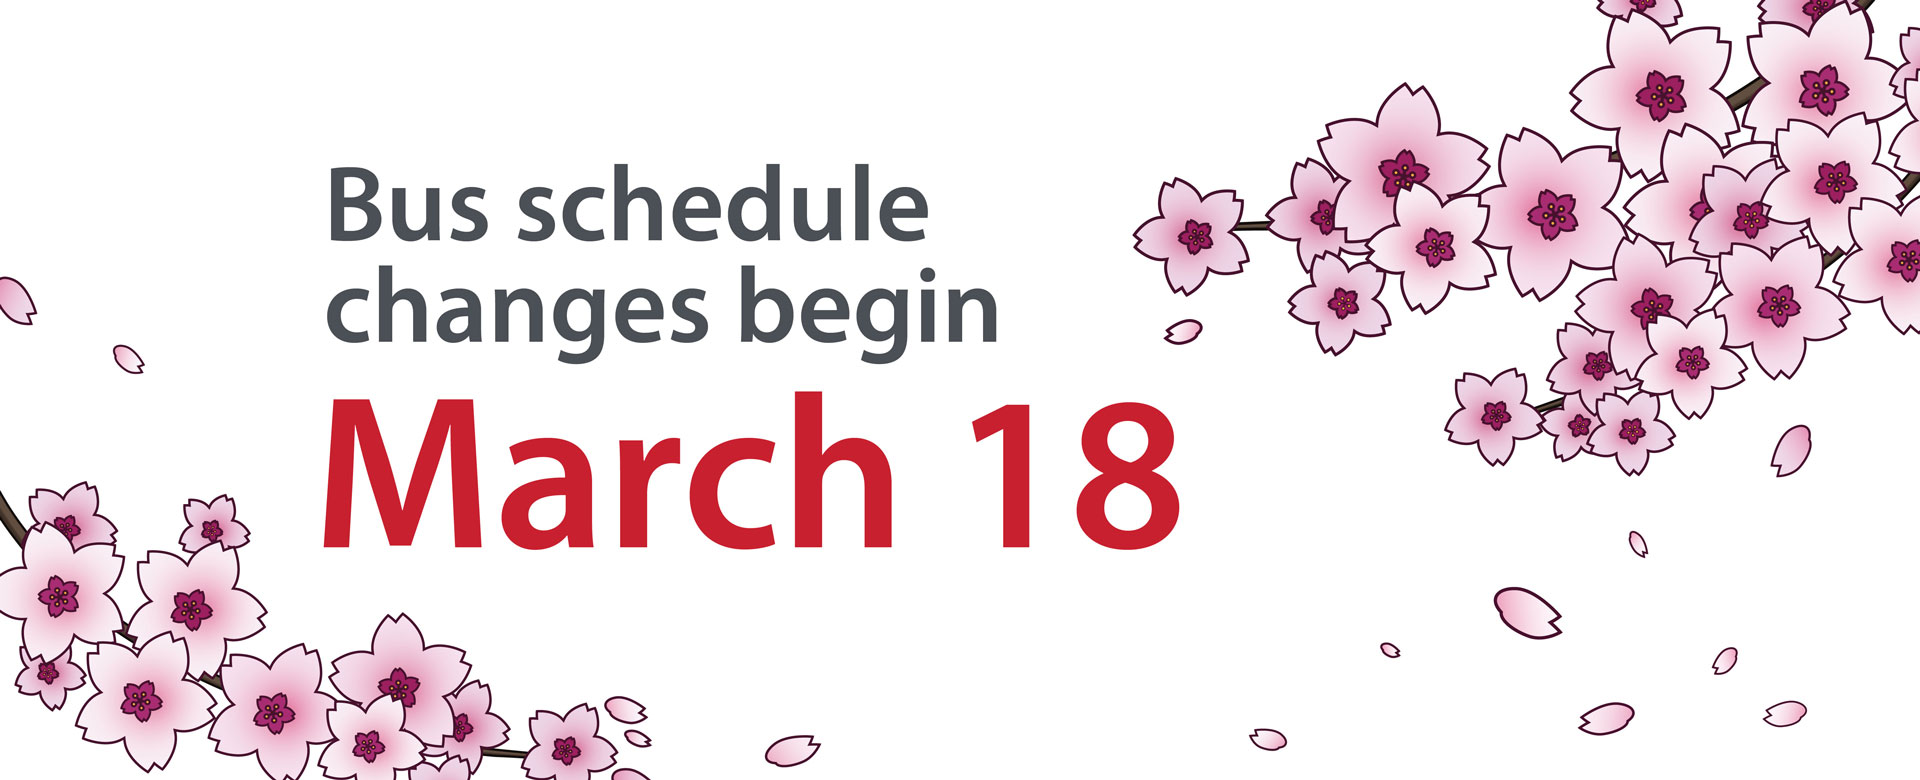 Spring service changes begin March 18